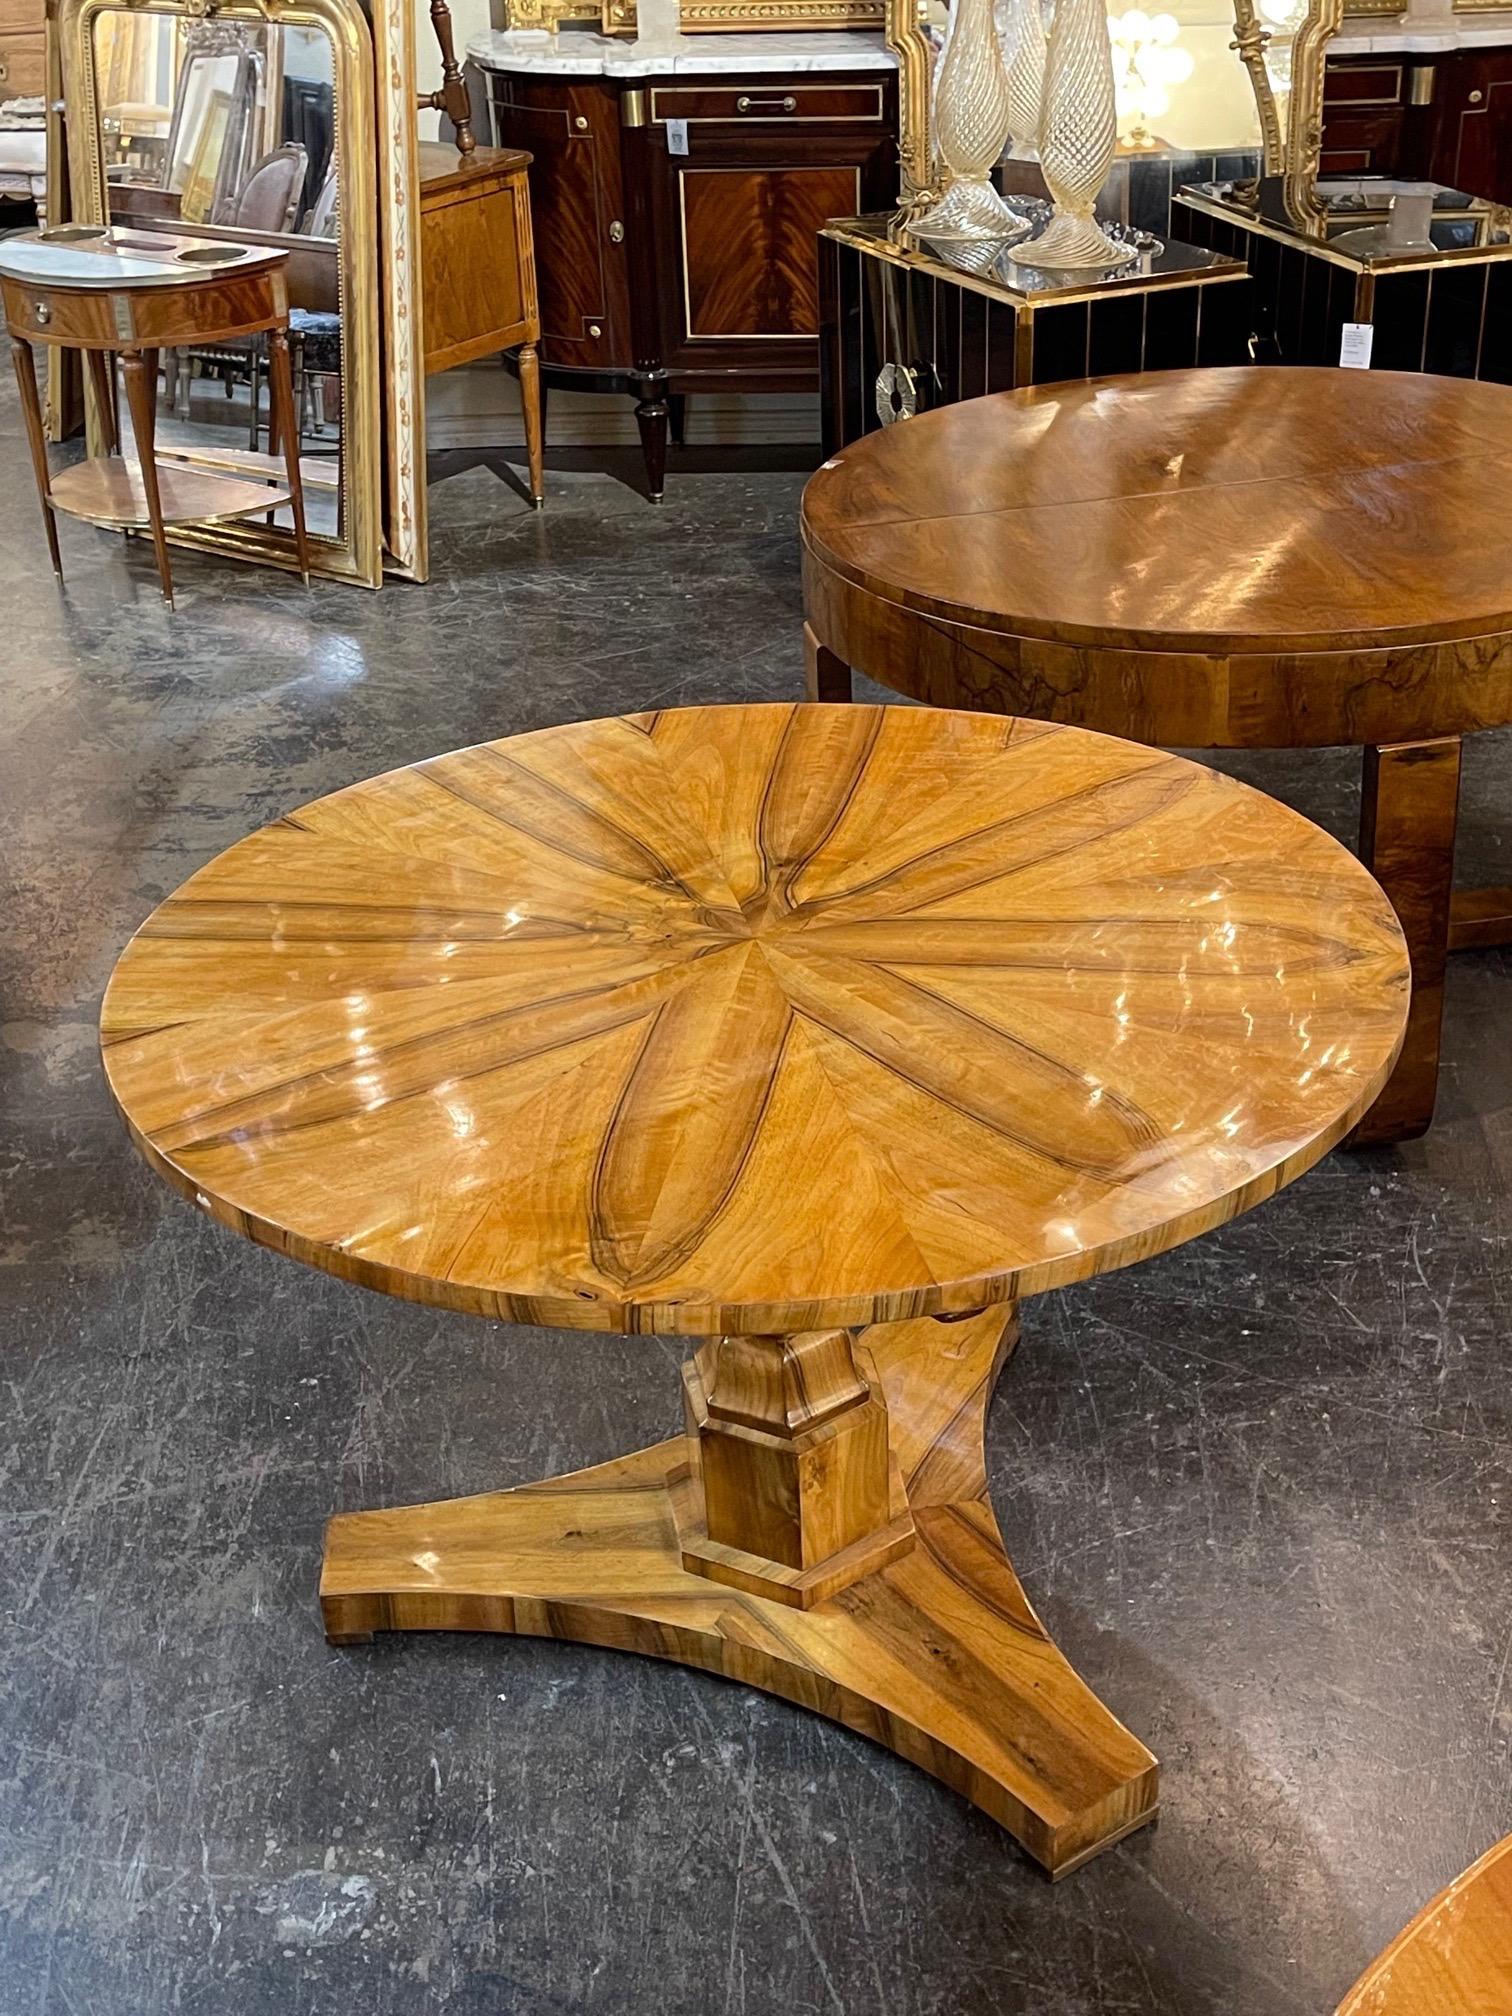 Exceptional 19th century Biedermeier walnut center table from Vienna, Austria. Superb polished finish along with an interesting design on the top. An outstanding piece!!